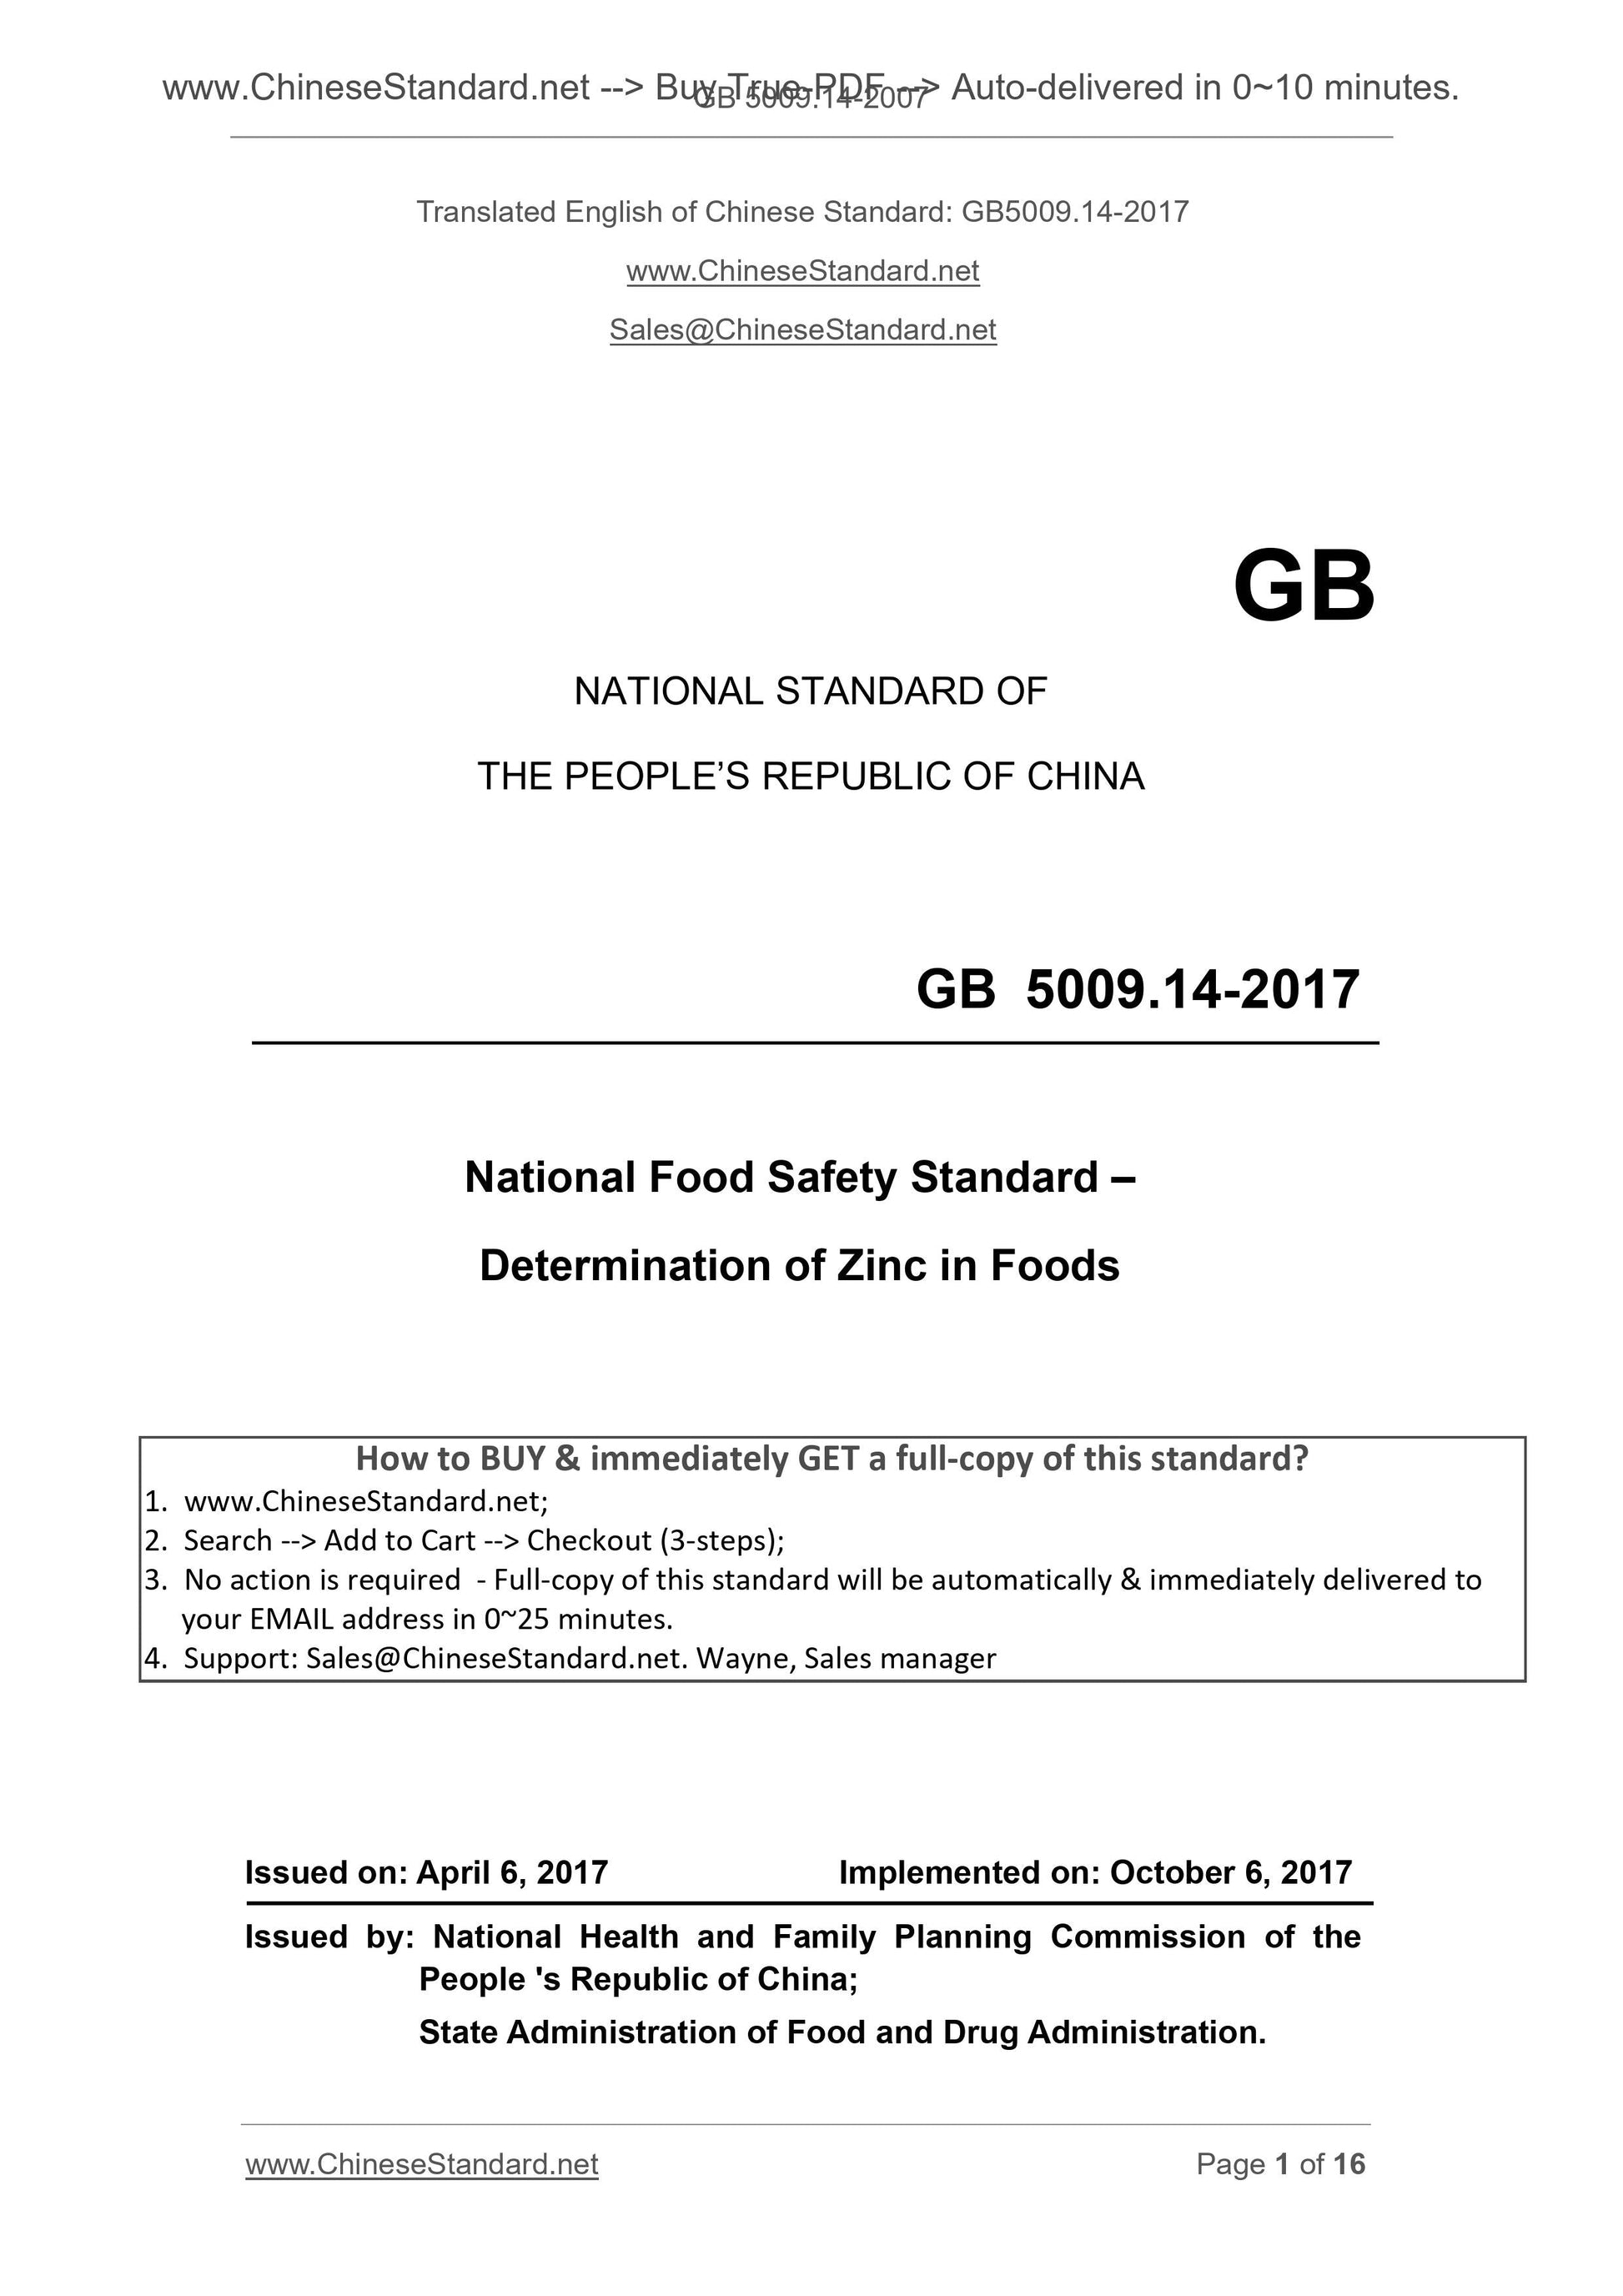 GB 5009.14-2017 Page 1